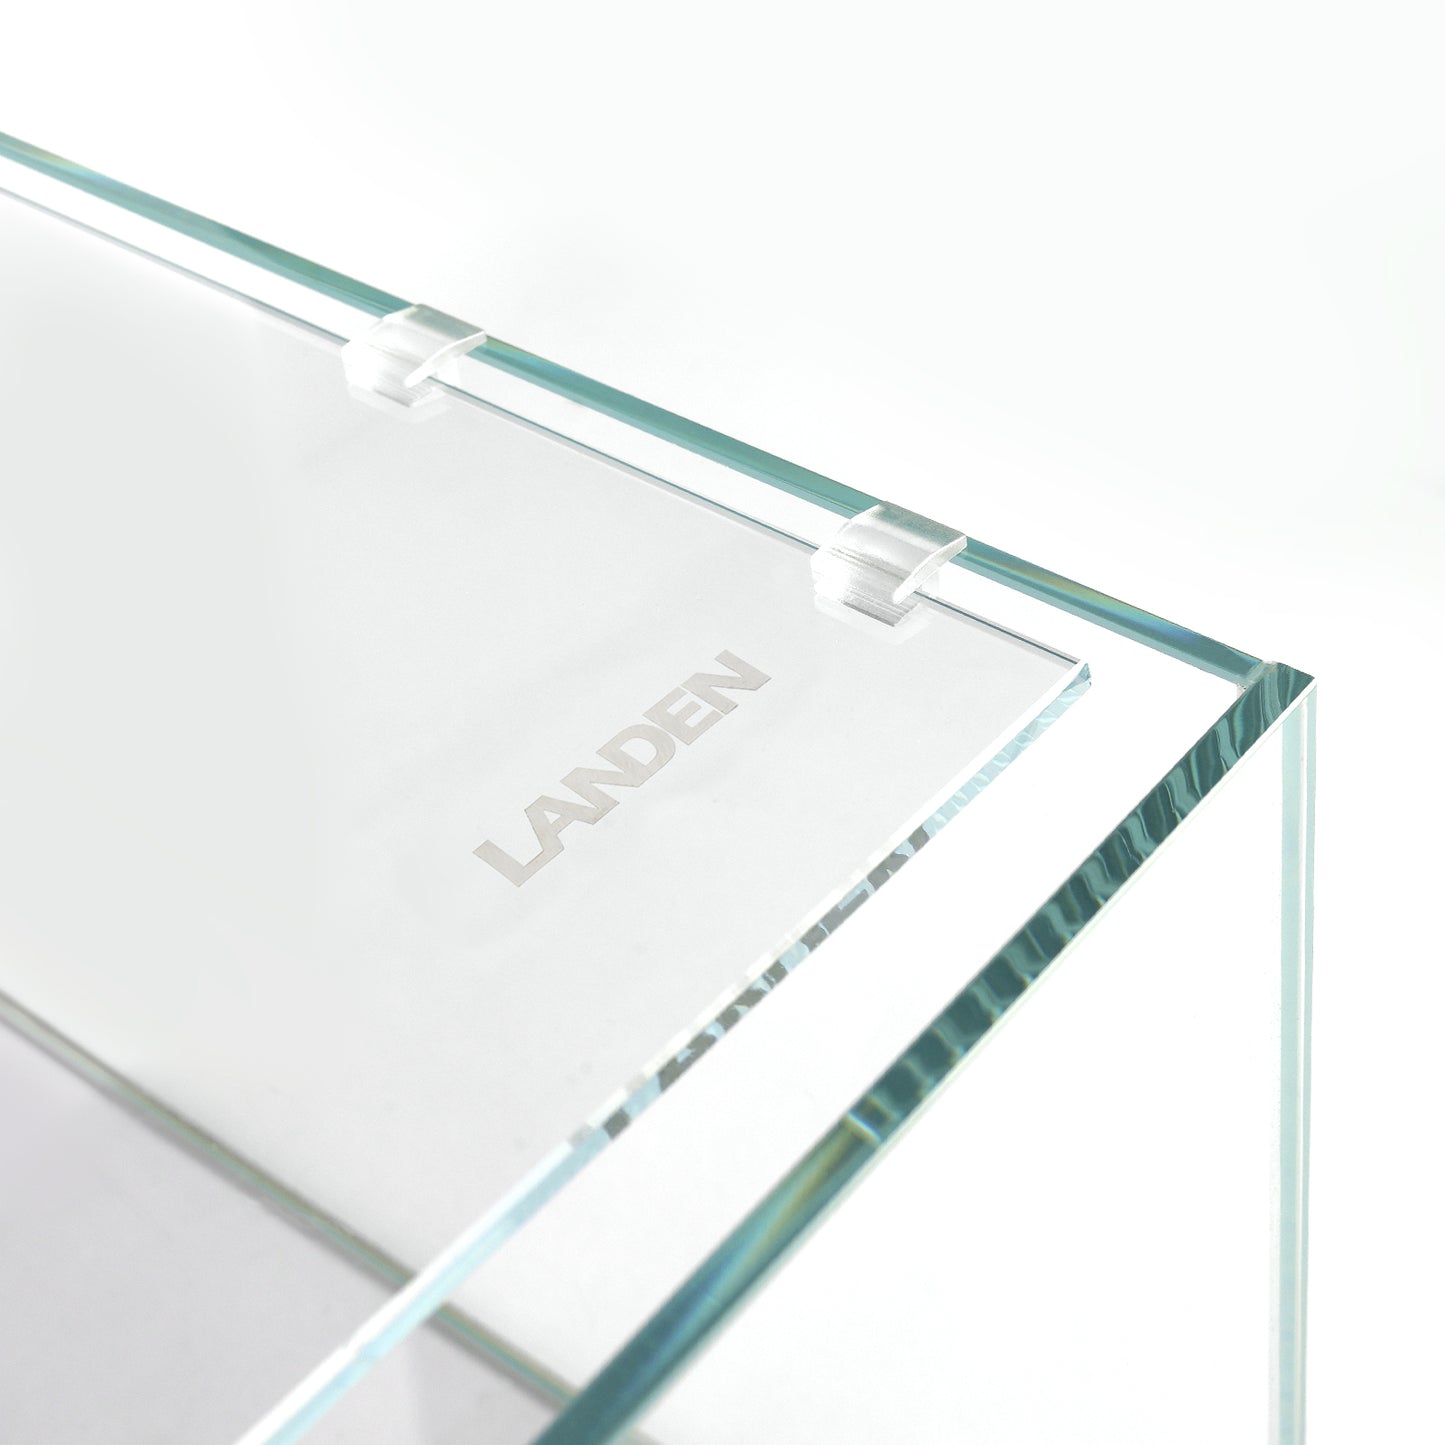 LANDEN 4mm Thick Clear Glass Aquarium Lid,Includes 4 Clips for Secure Placement, 576 x 352mm(22.68x13.86 inches) Adapted to SD604545,RF604540